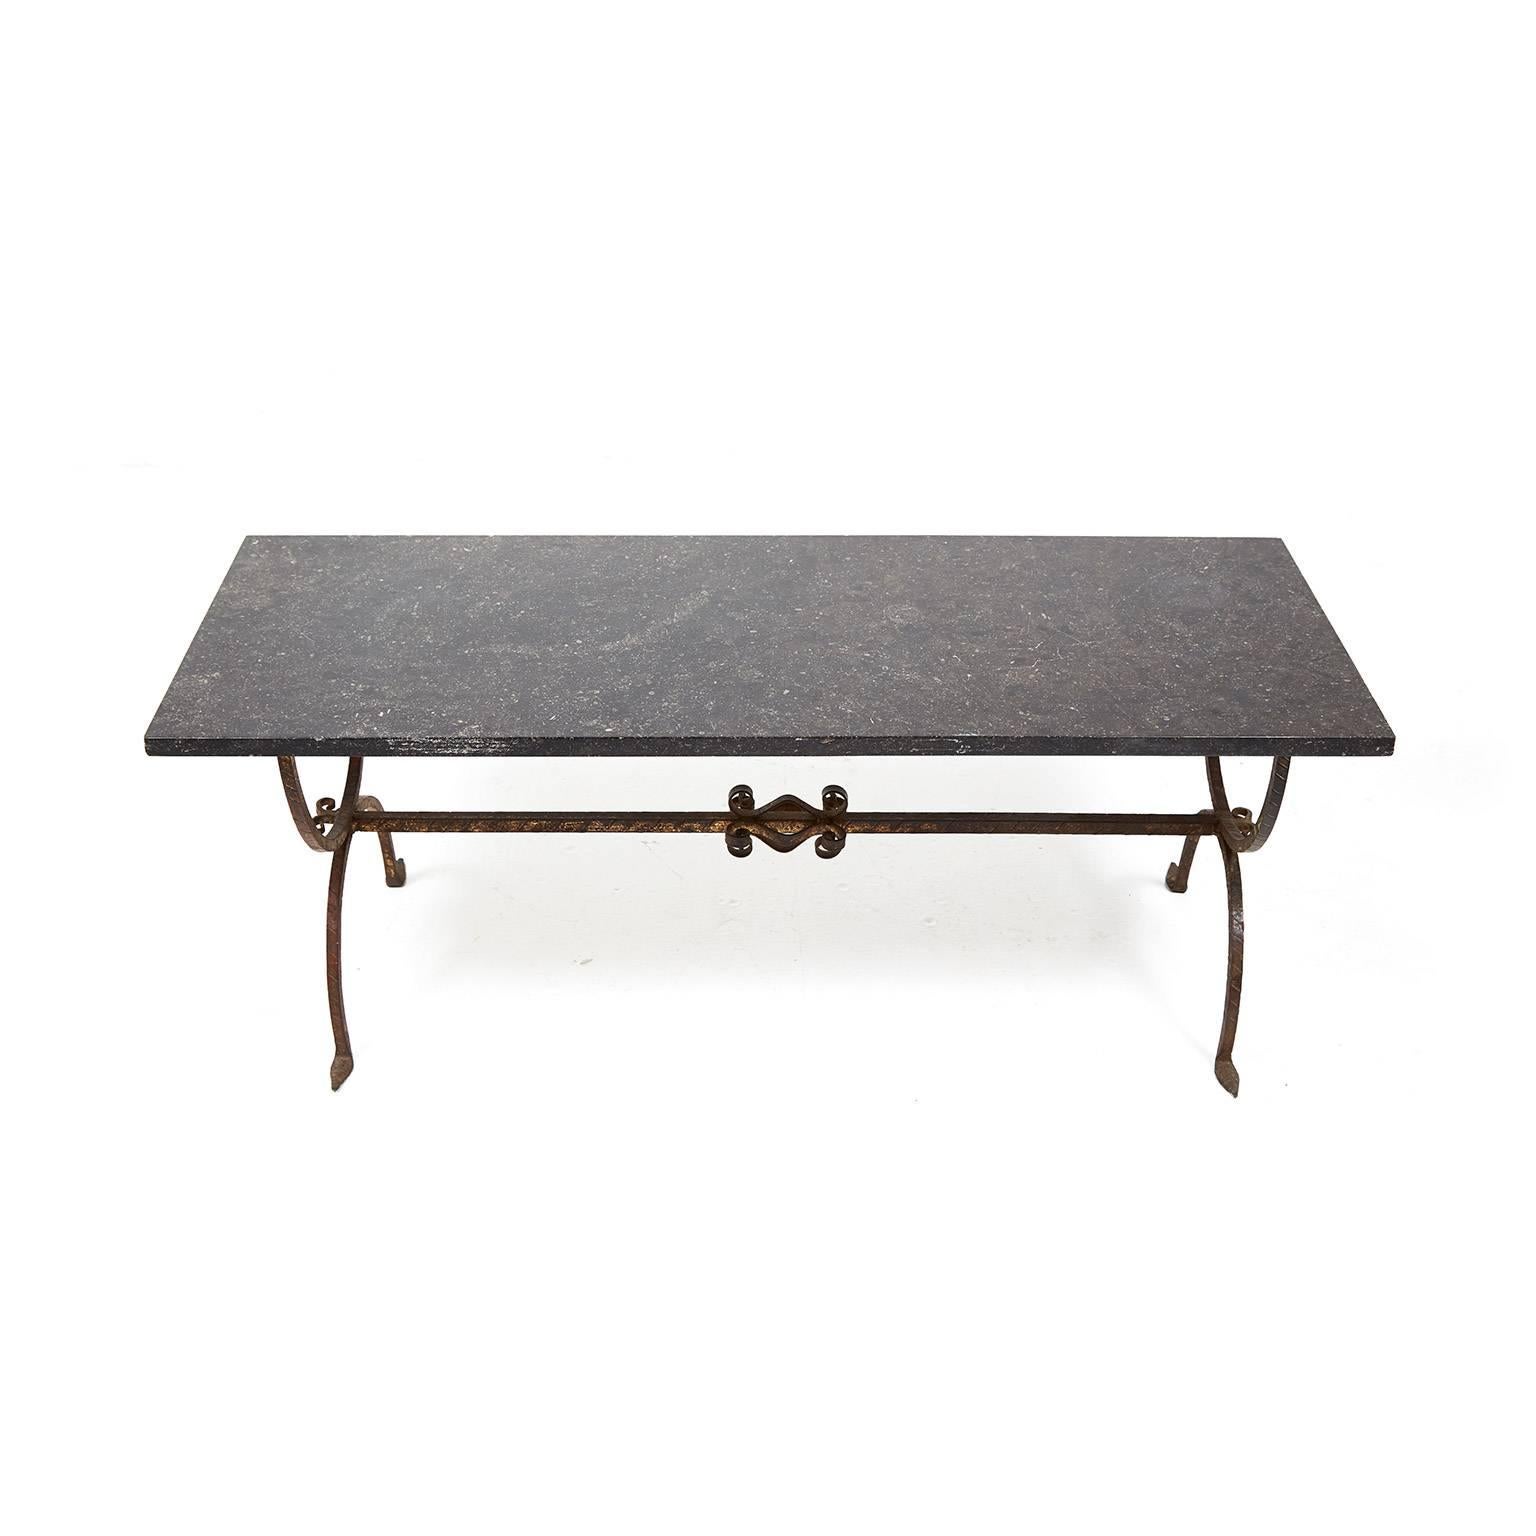 Antique French 1930s coffee table with wrought iron base and black granite top. Italianate curves on the support struts and a leaf design on the legs. The deep granite color contrasts nicely with the wrought iron. A solid and lovely piece suitable